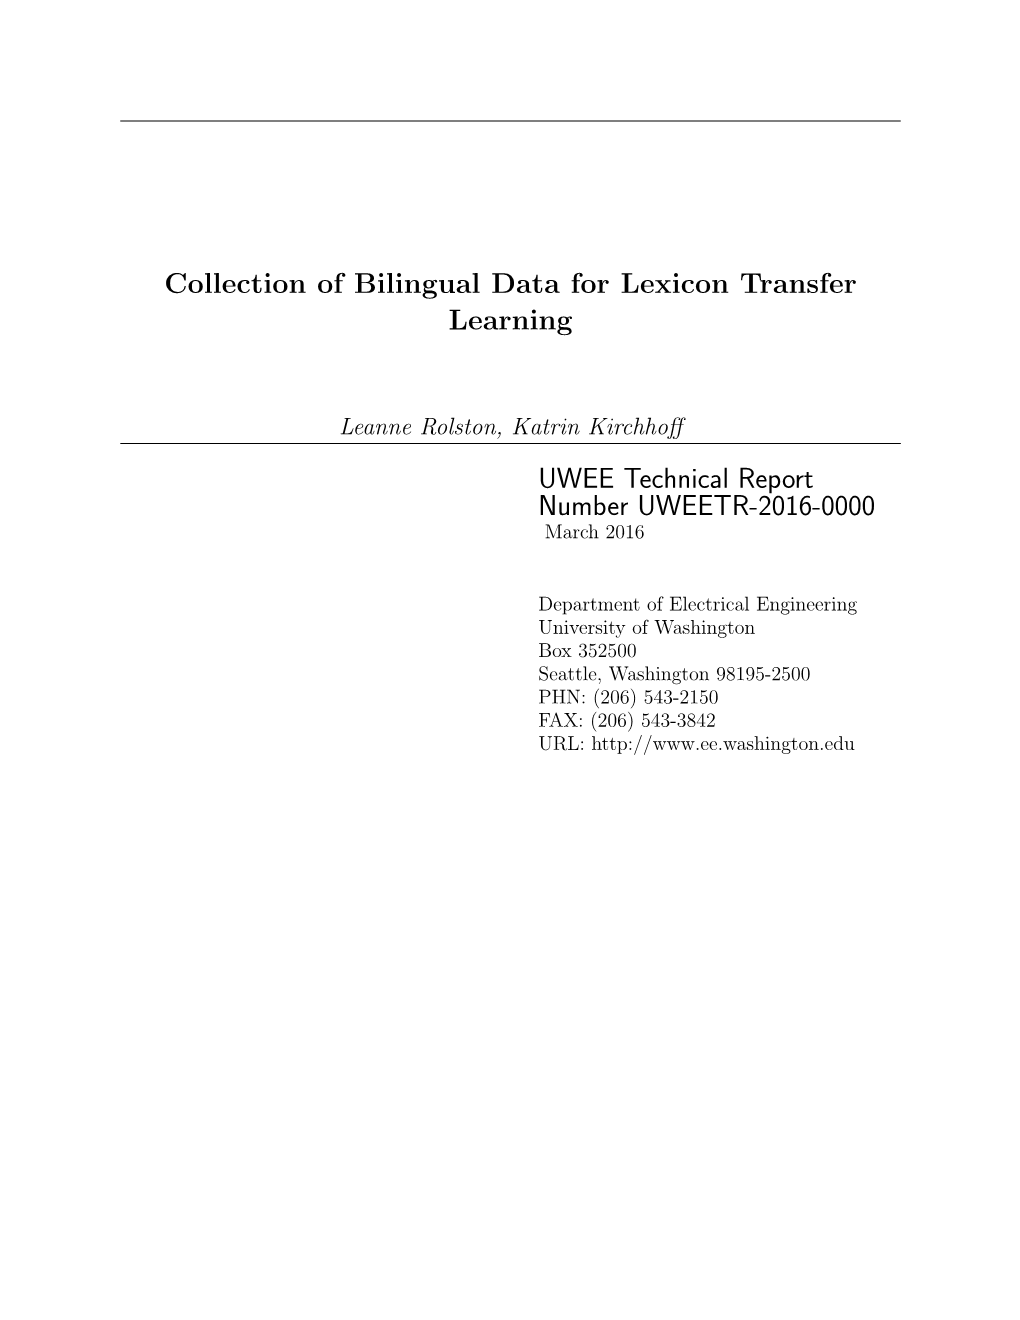 Collection of Bilingual Data for Lexicon Transfer Learning